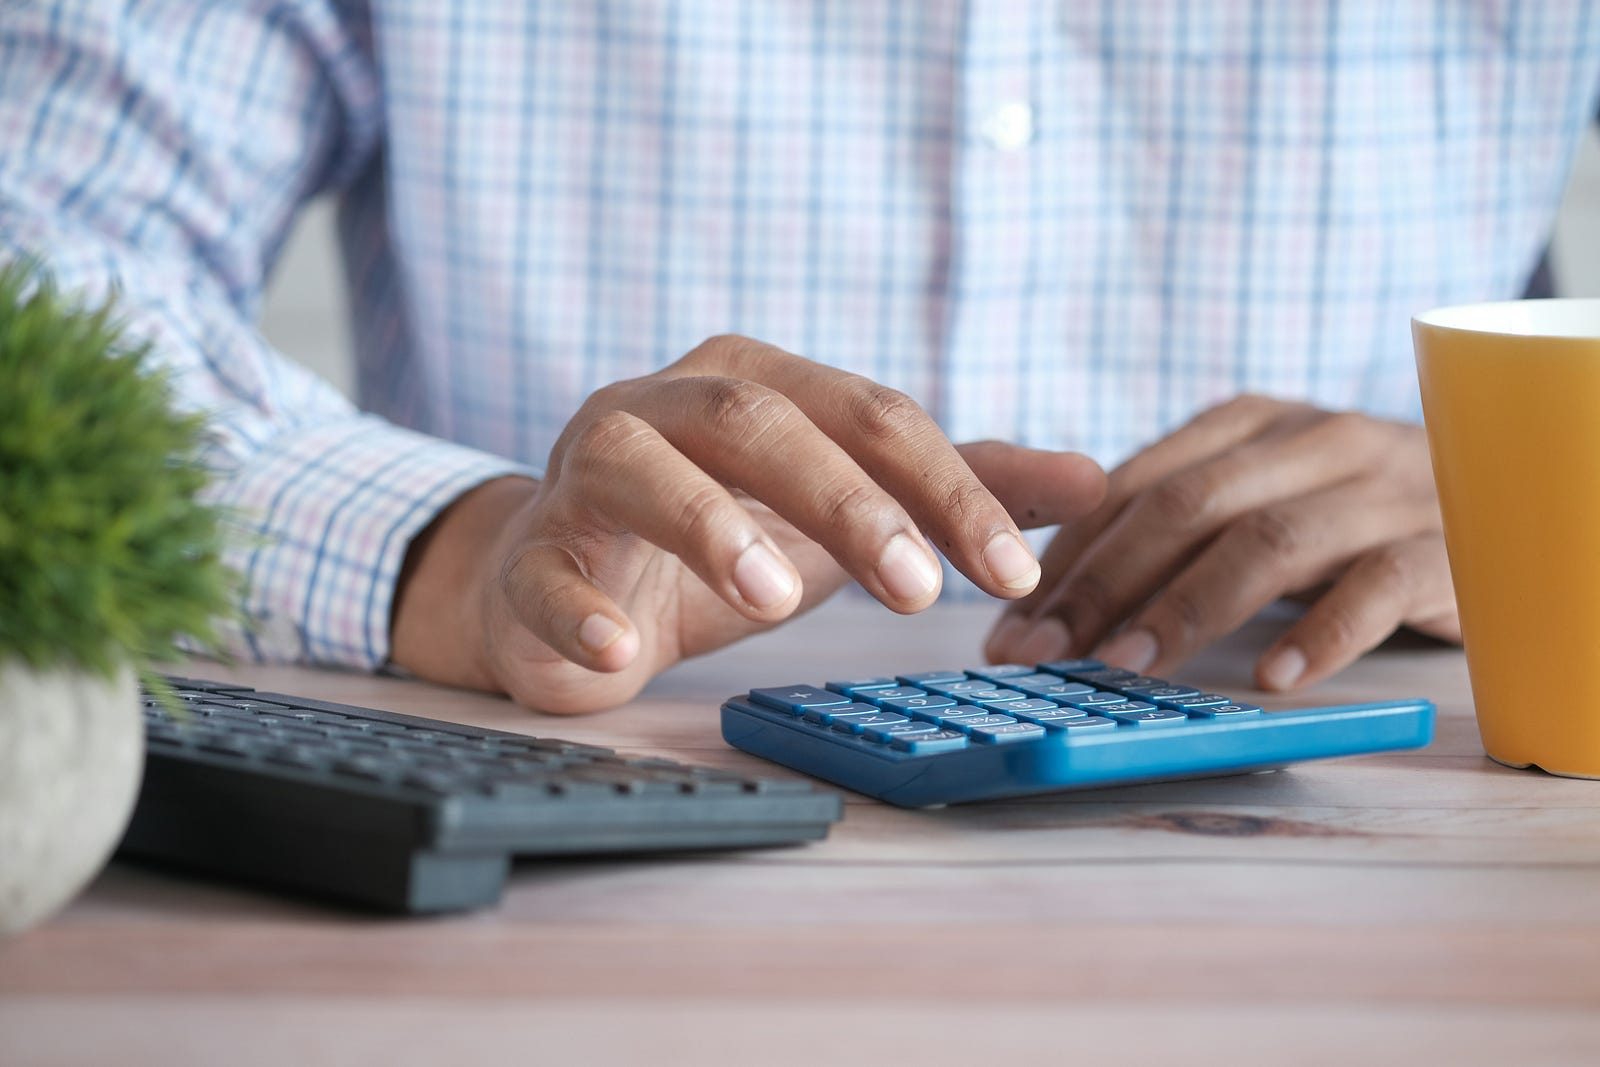 A person taps the keys of a blue calculator.